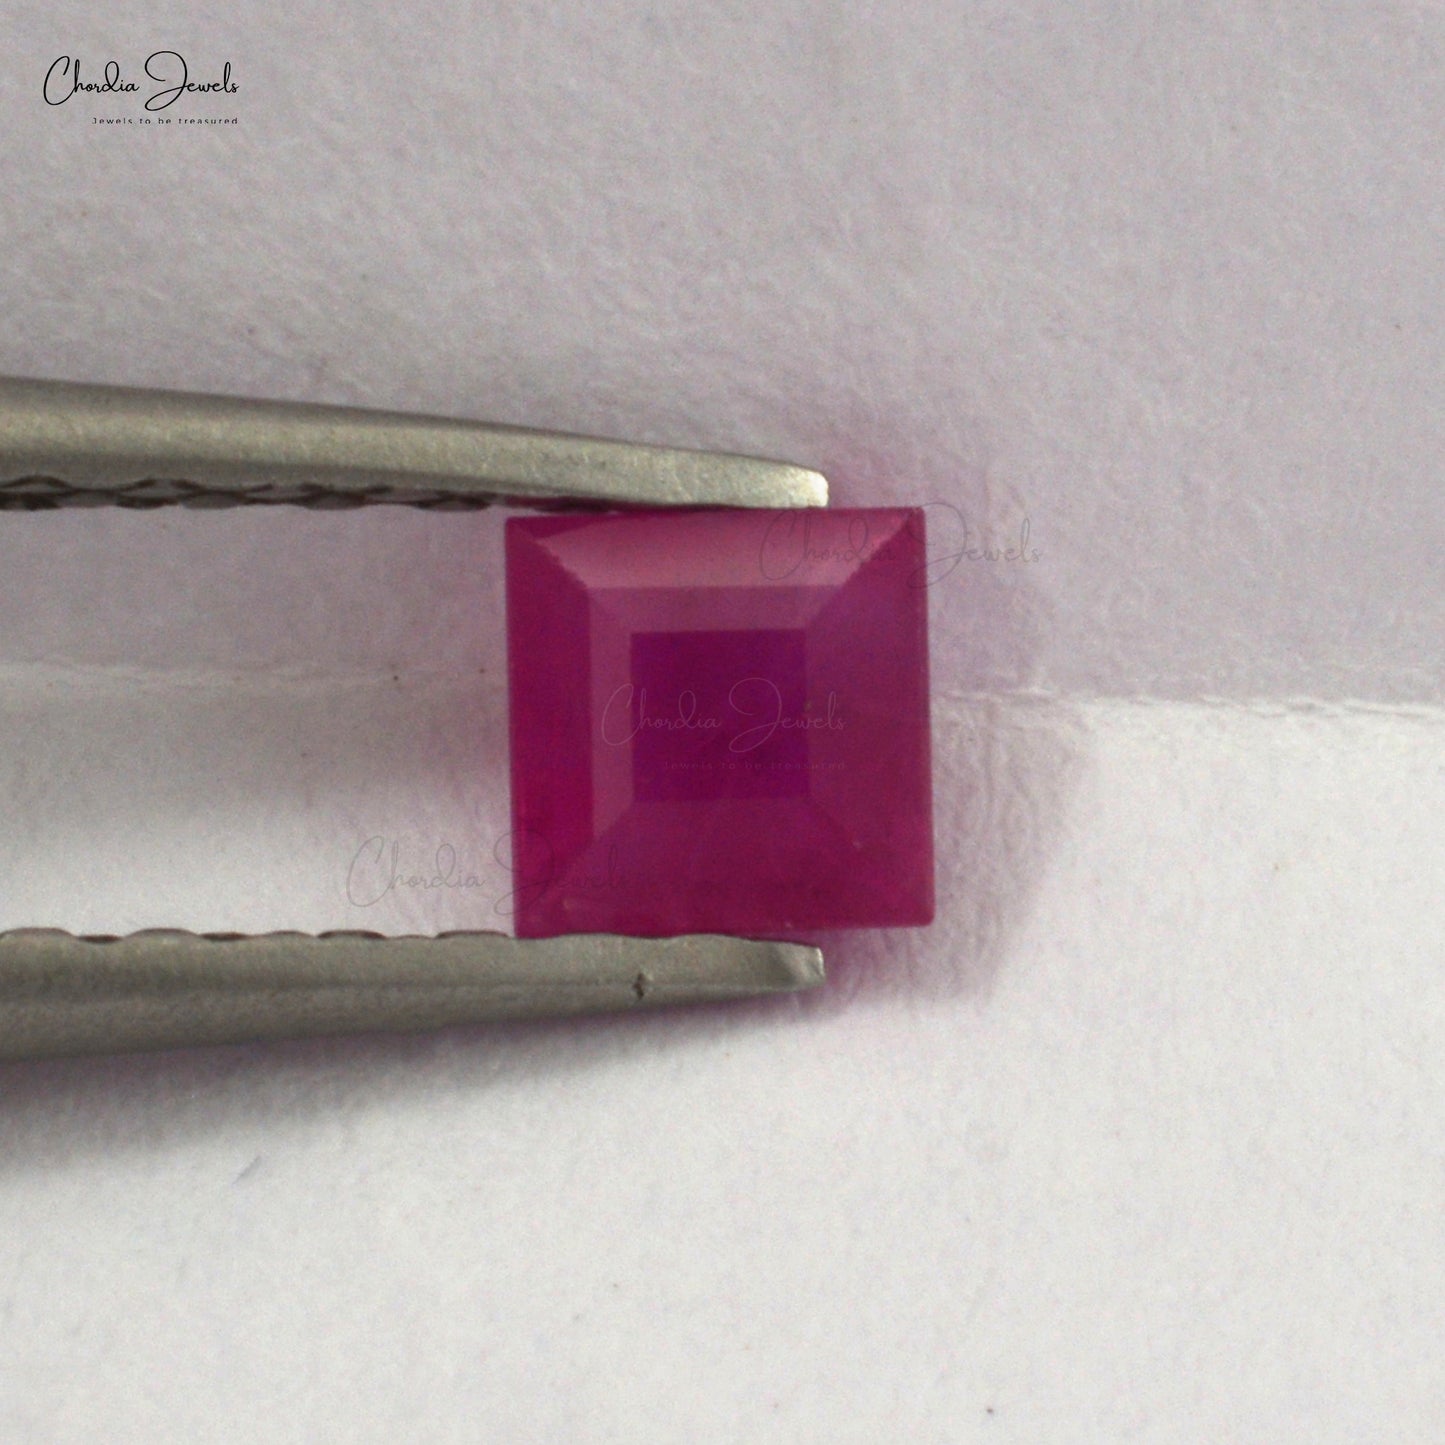 4mm Fine Quality Ruby Square Natural Loose Gemstone At Discount Price, 1 Piece